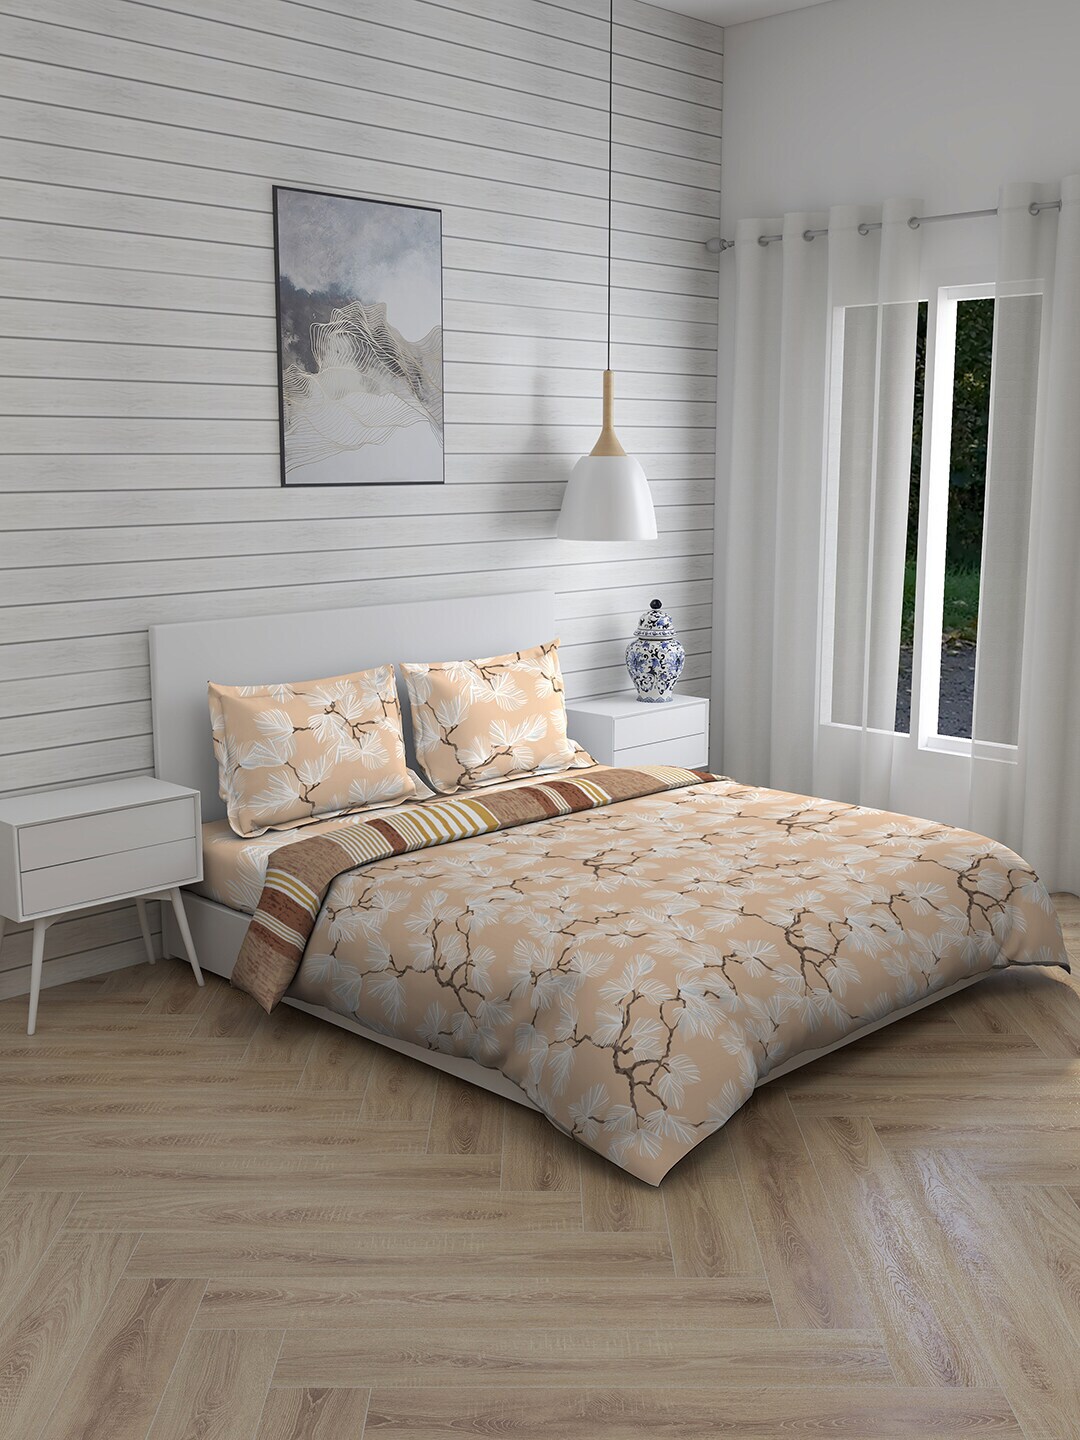 Boutique Living India Beige & White Floral Printed Pure Cotton Double King Bedding Set Price in India